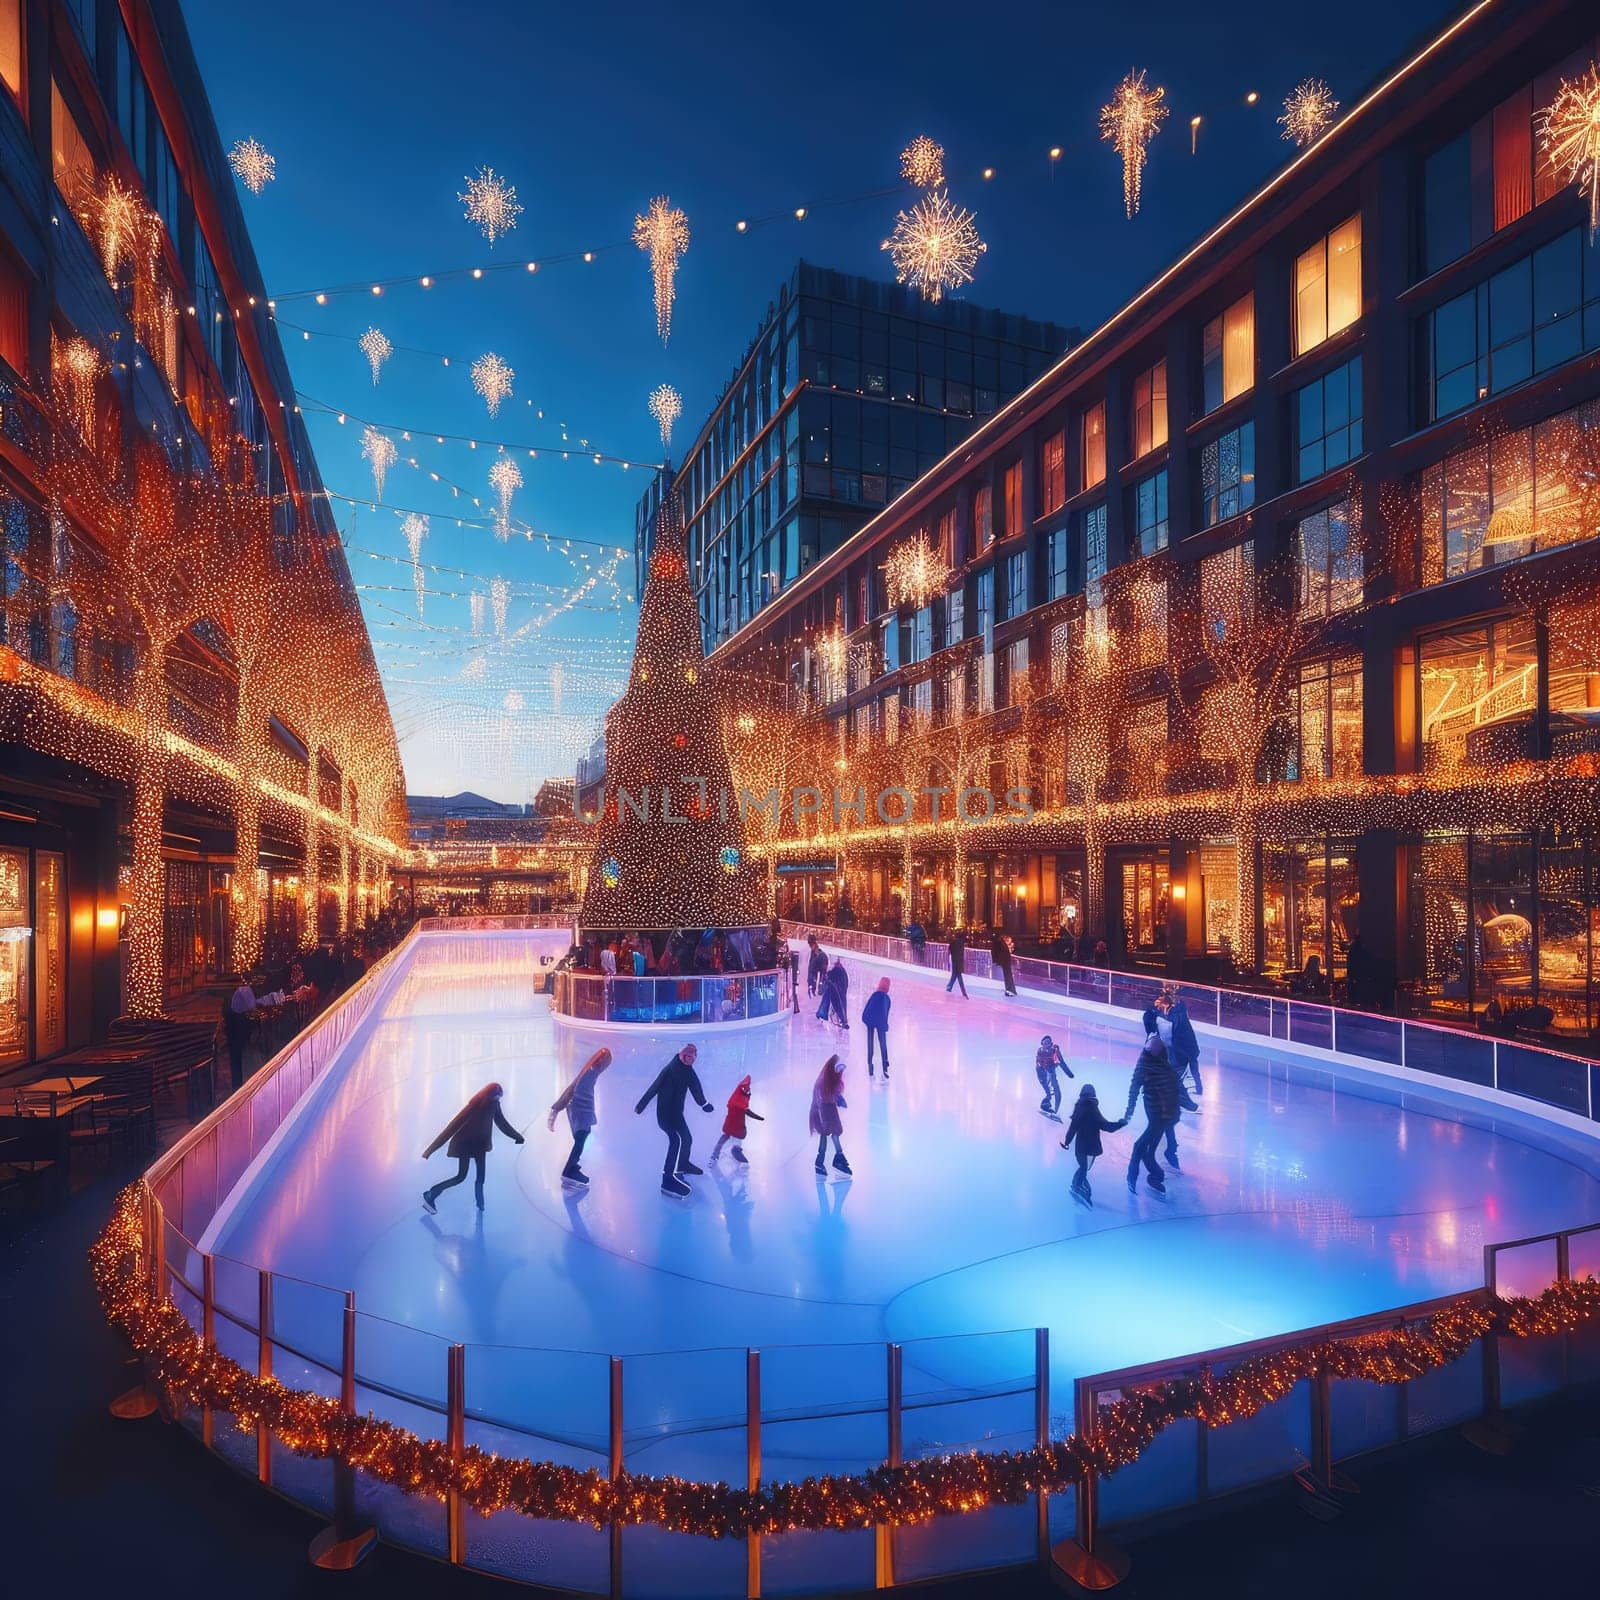 Ice skating rink near the shopping center. decorated for Christmas. In the evening by Kobysh